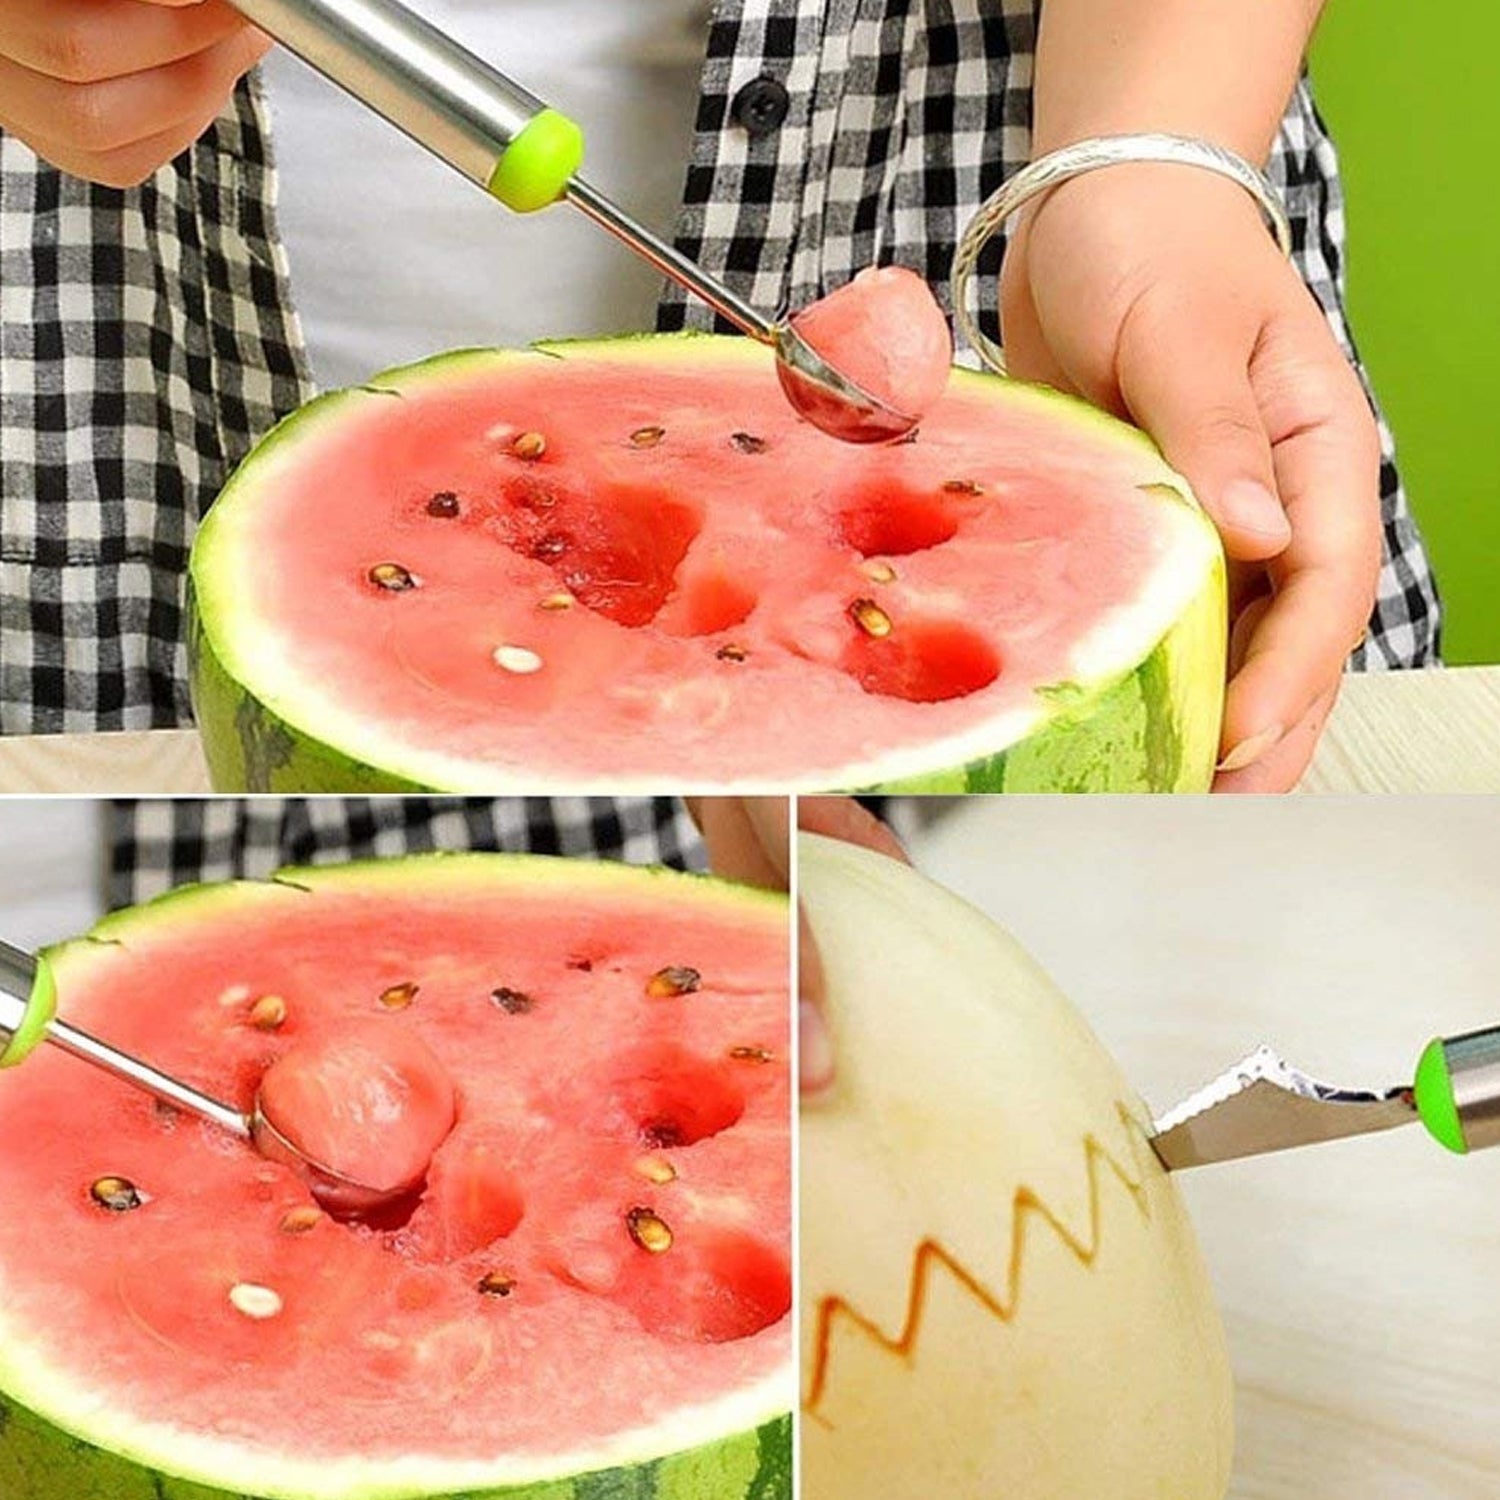 5335 Multifunctional 2 in 1 Melon Baller - Stainless Steel Dig Scoop with Fruit Carving Knife. 